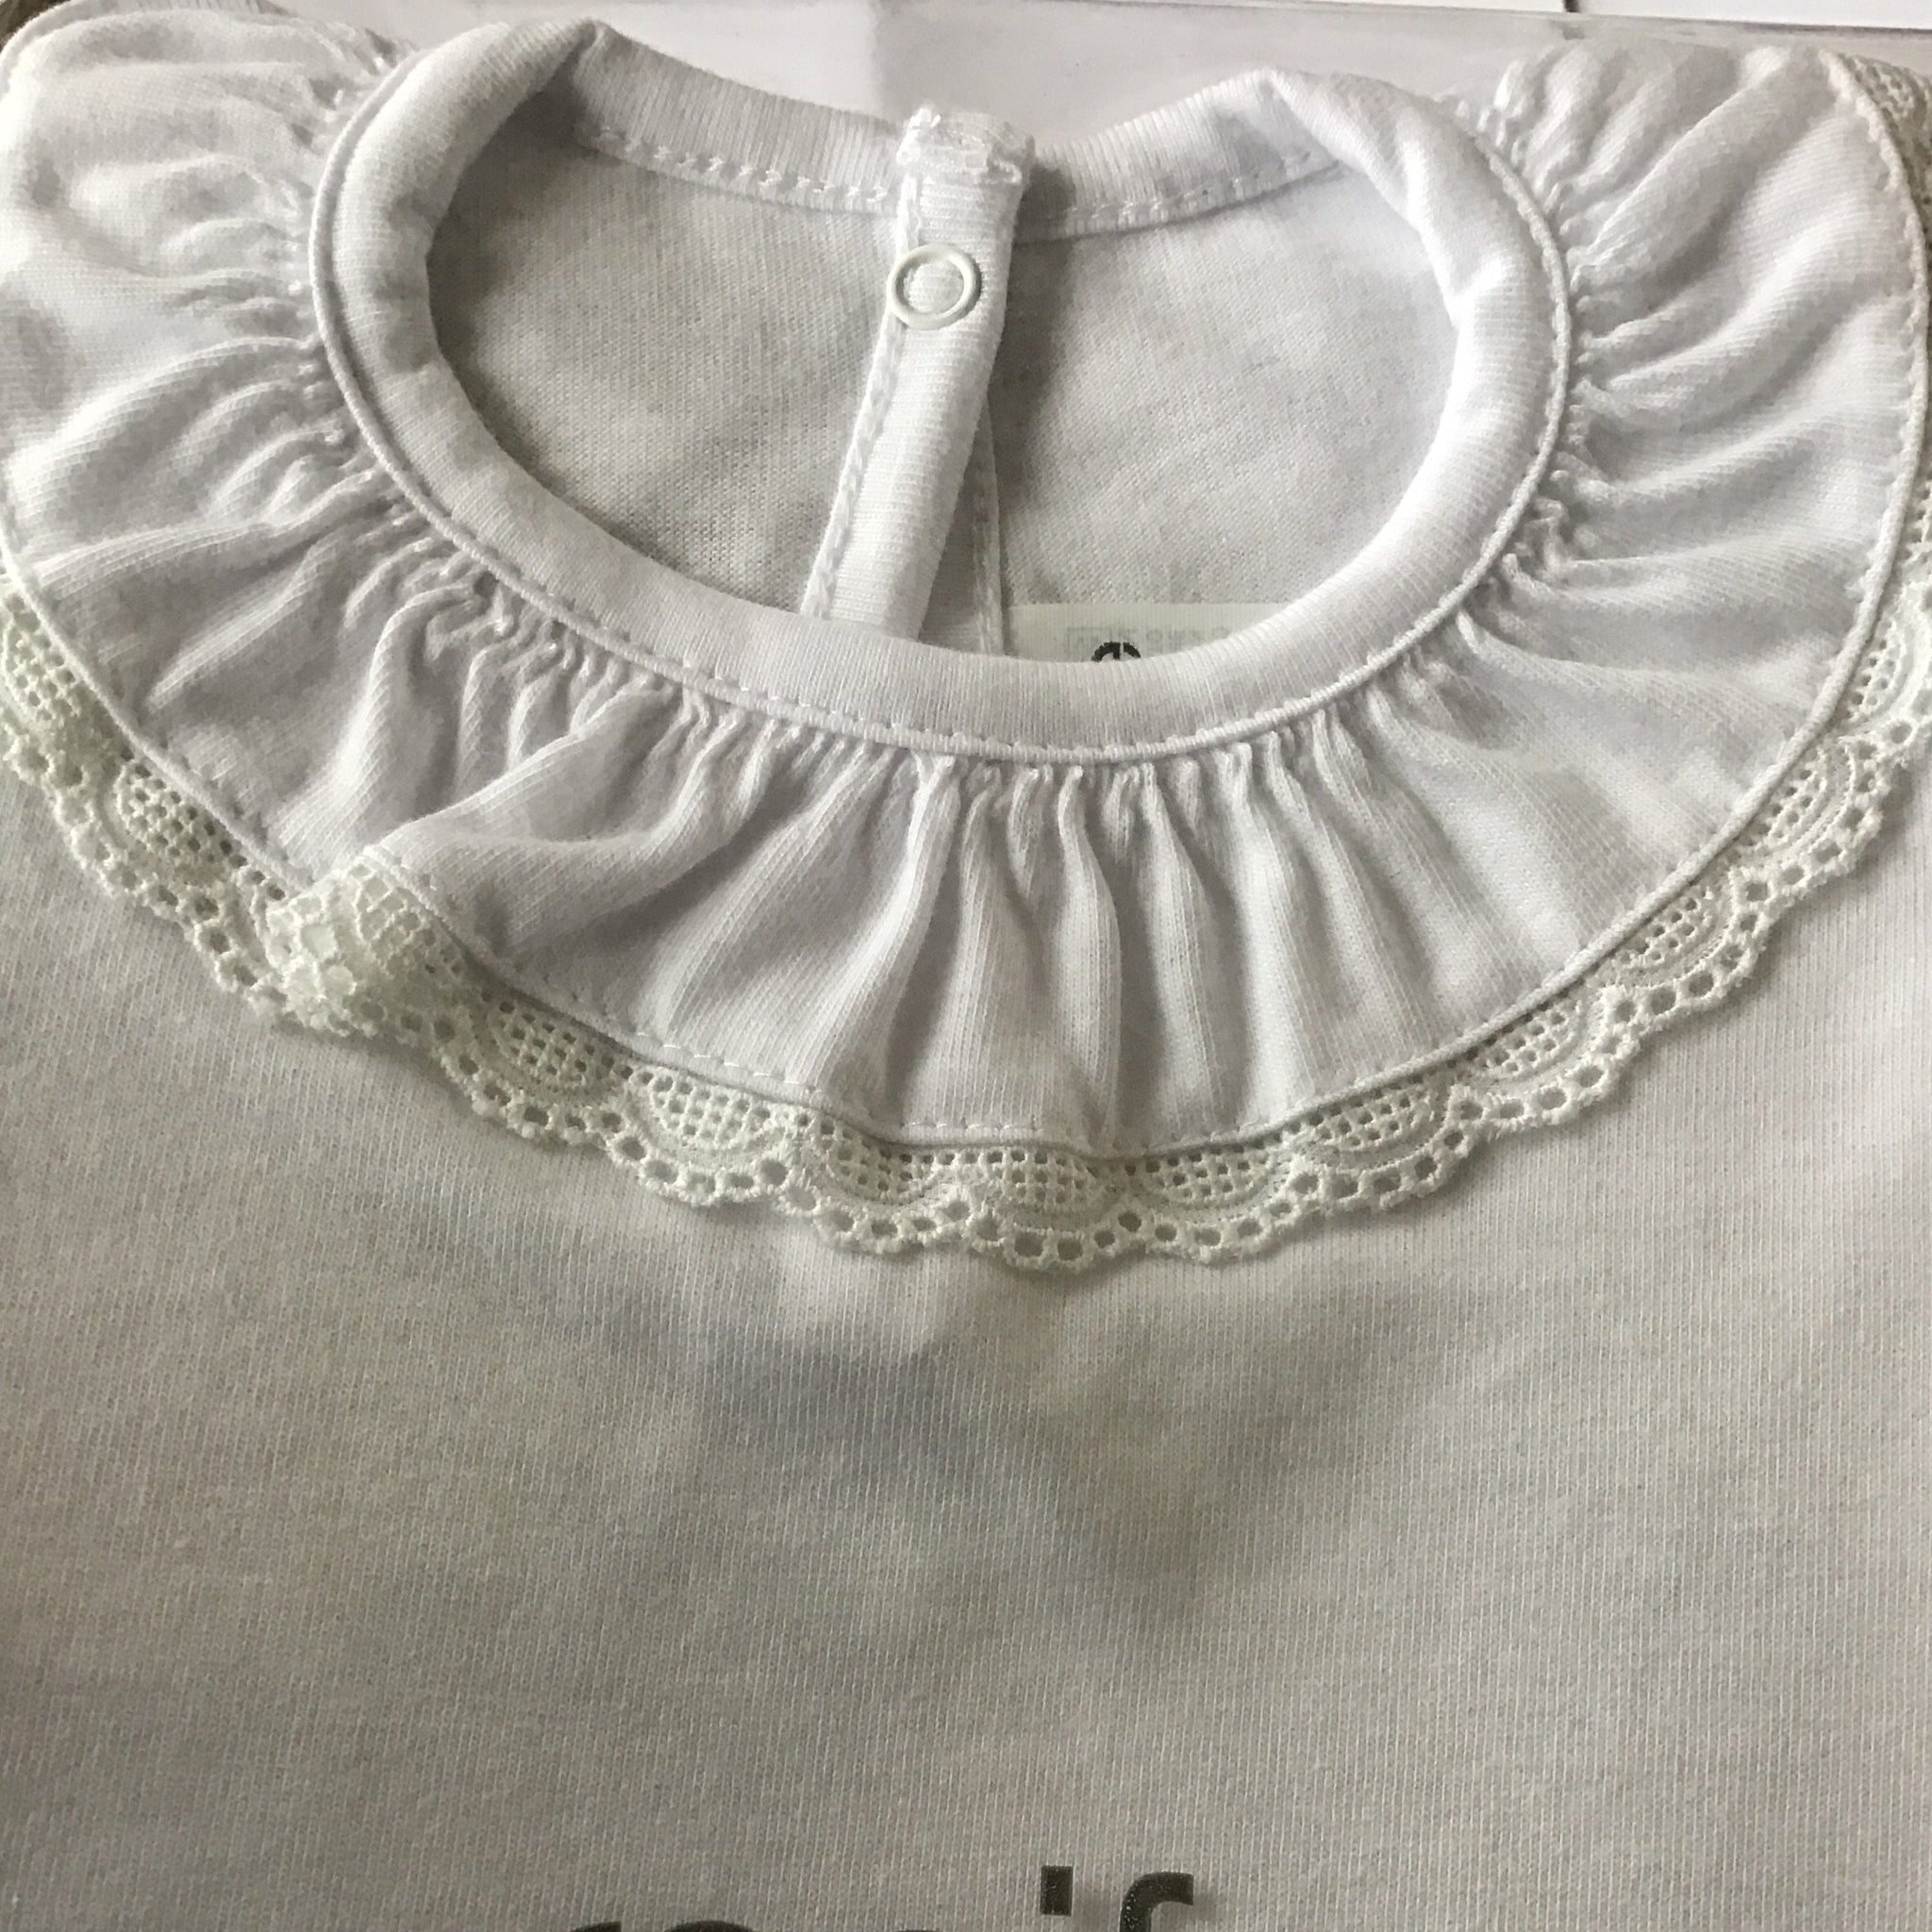 SALE Rapife Baby Girl’s White Cotton Sleeveless Body Top Frilled Collar